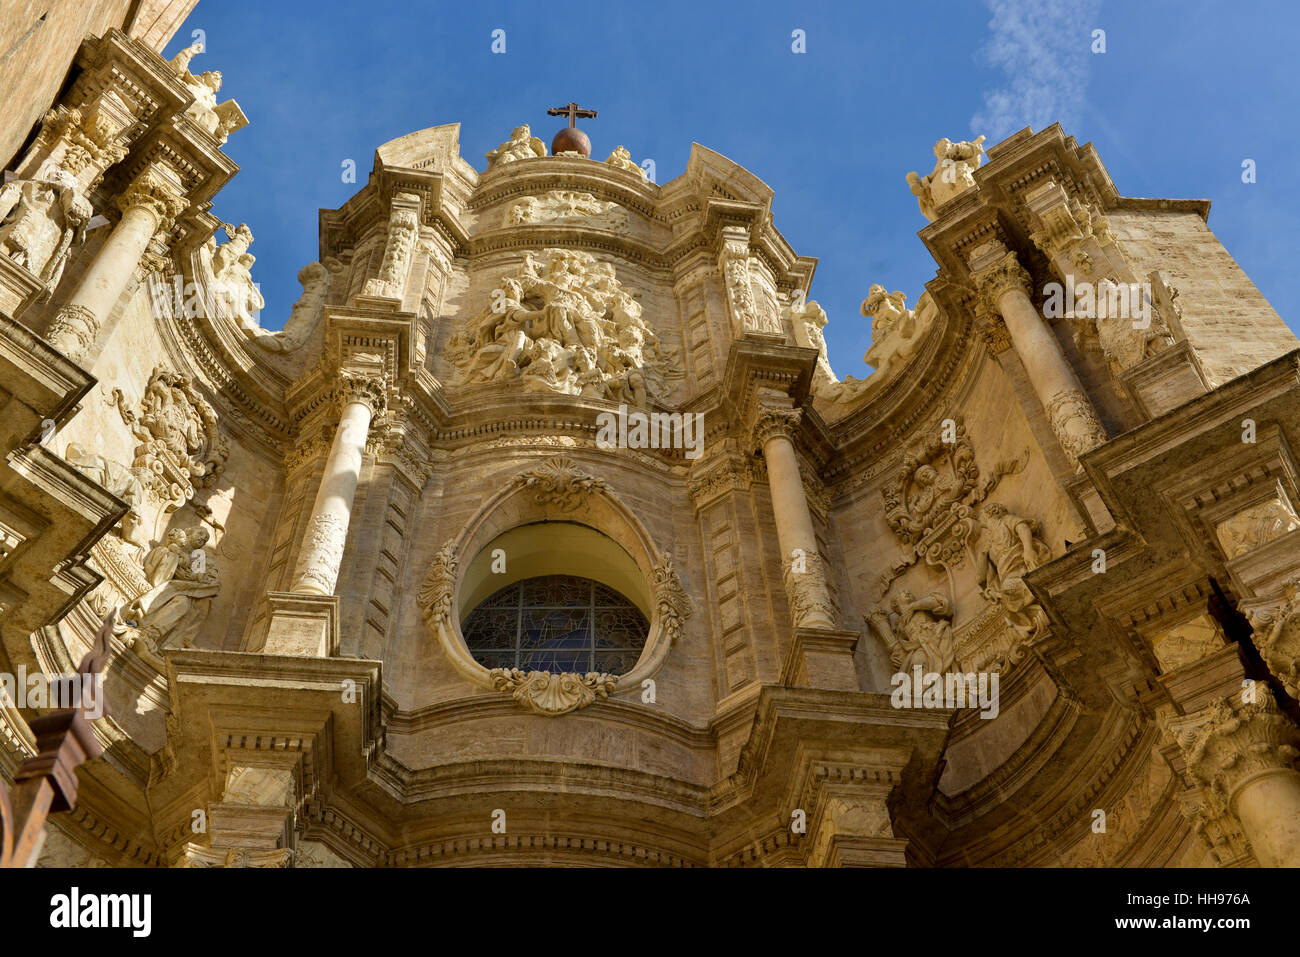 The cathedral of Valencia, Spain. Stock Photo